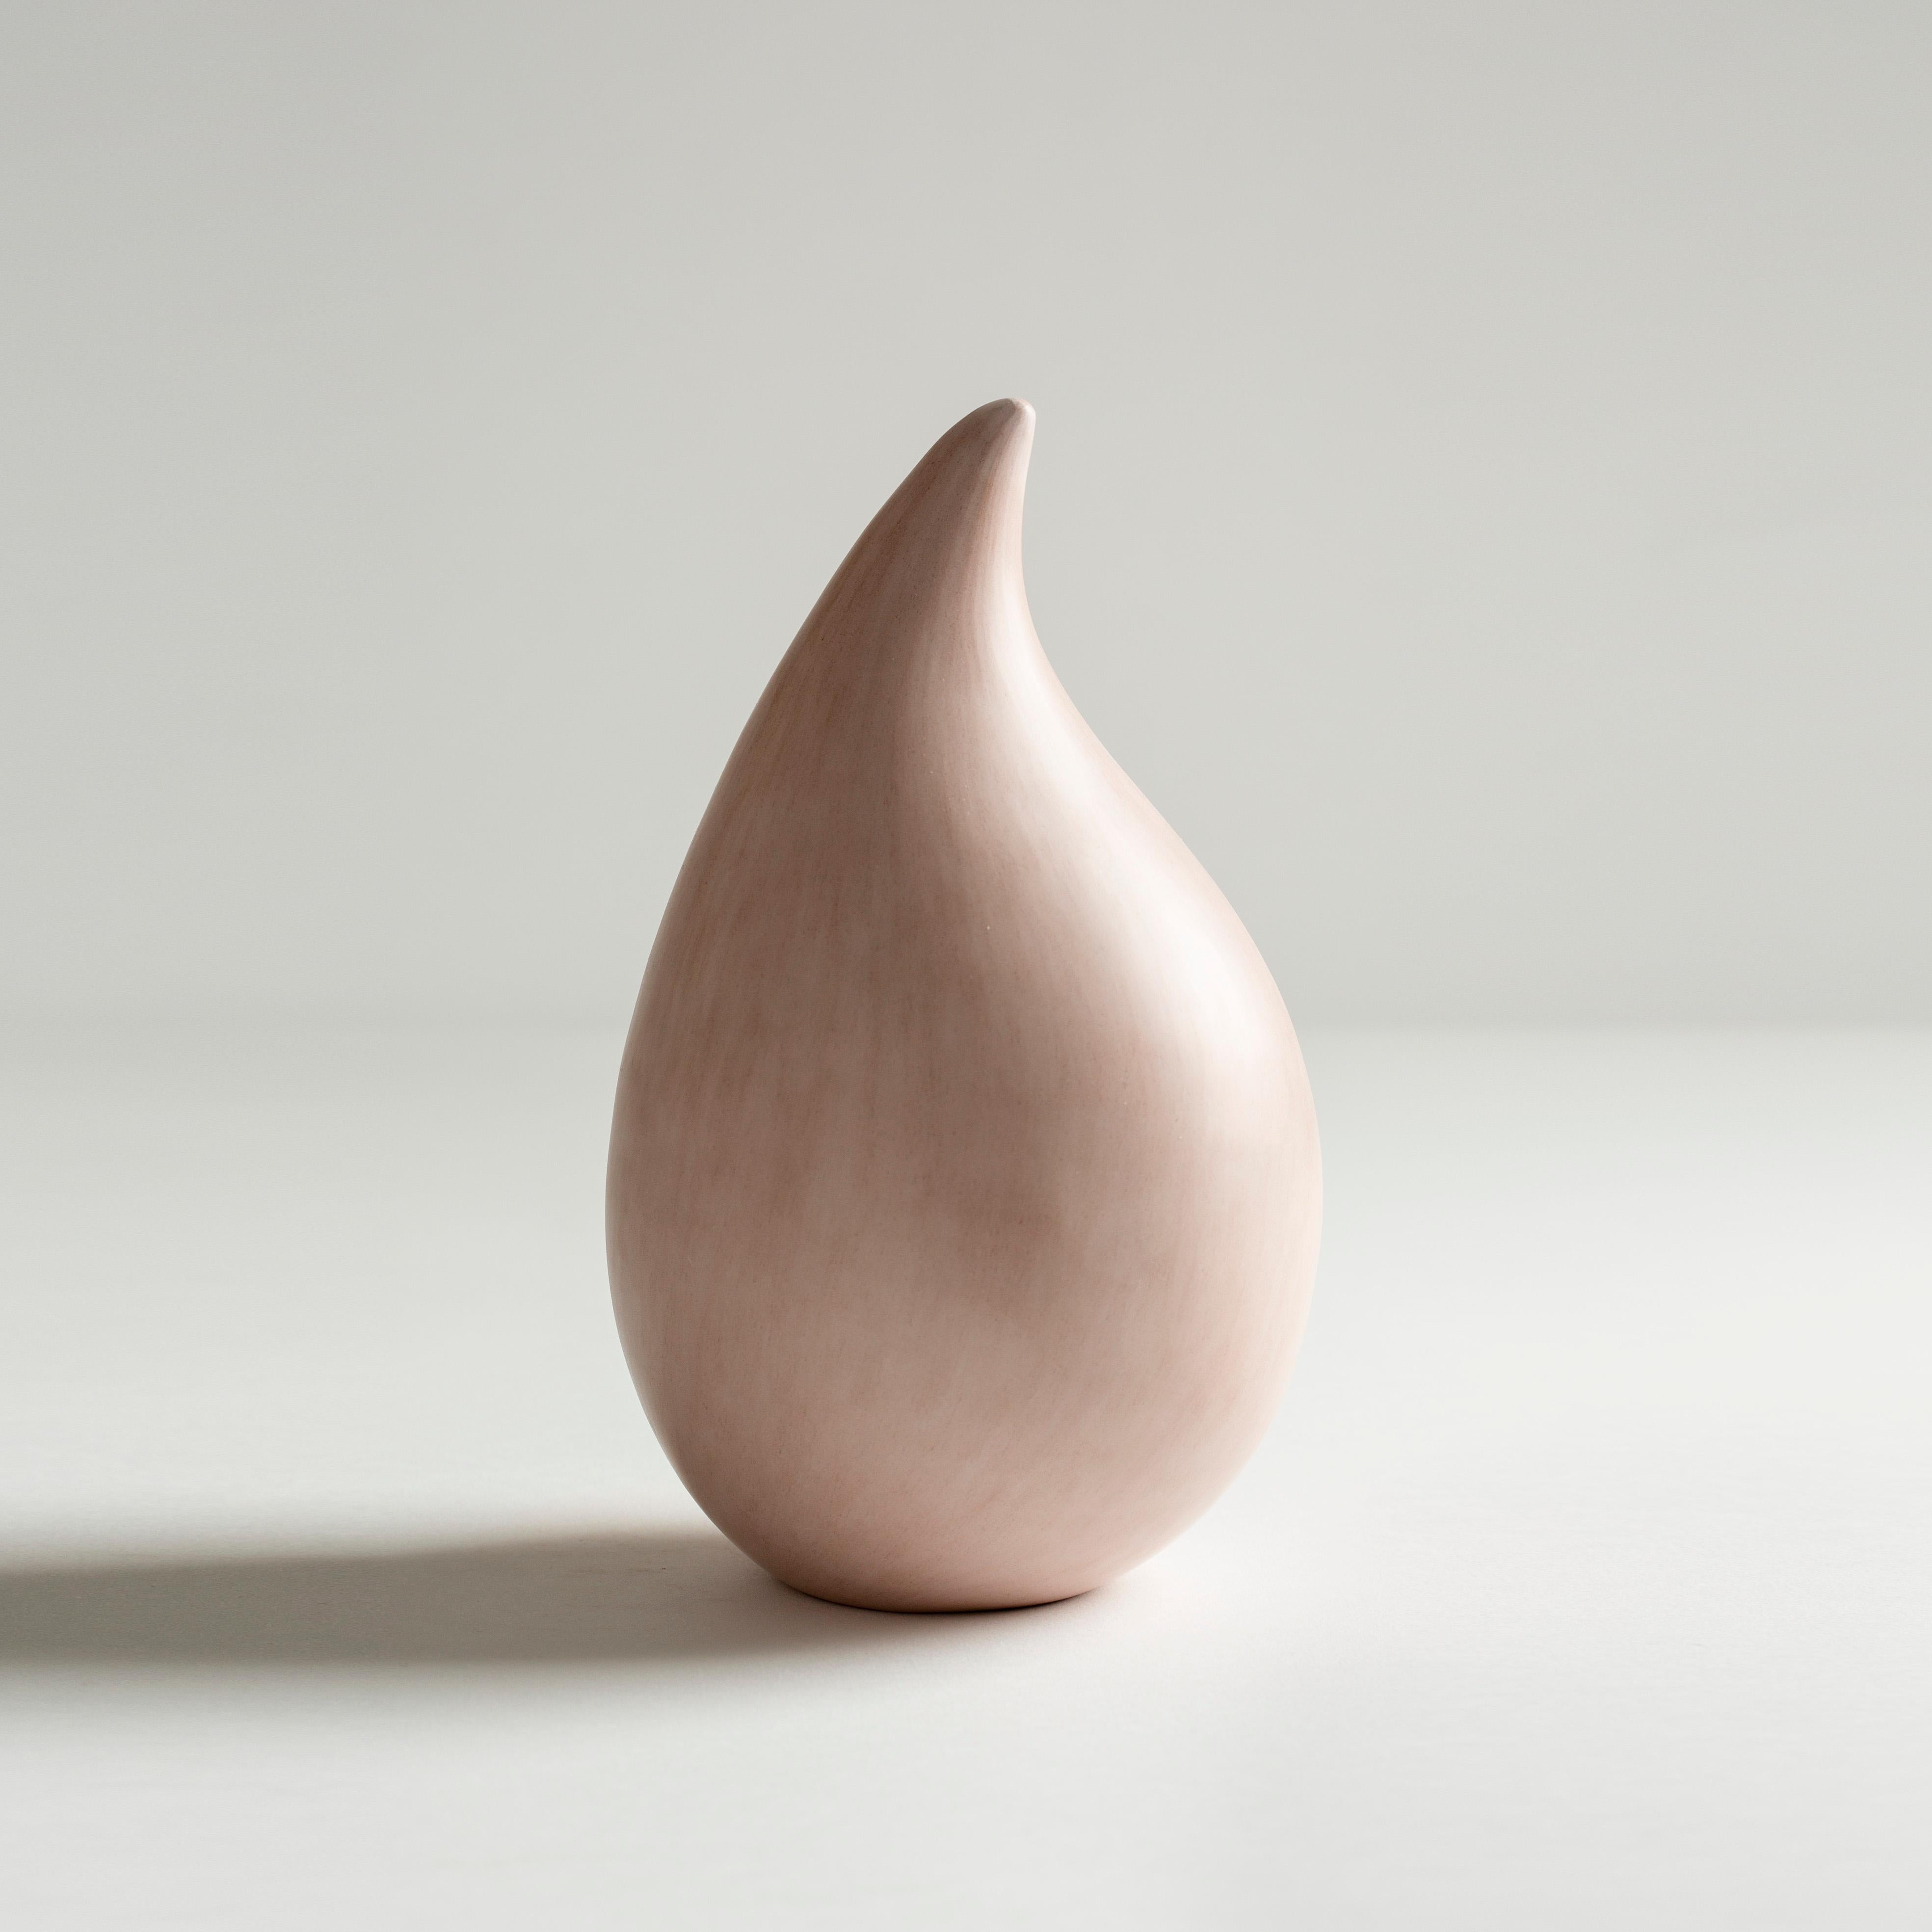 Hello, 2020 (Ceramic, Left to right C. 8.25 in. h x 5 in. w; 11.25 in. h x 5 in. w; 5.75 in. h x 8.75 in. w, Object No.: 3935)

Tina Vlassopulos was born in London in 1954. After graduating from Bristol Polytechnic in 1977, she returned to London to